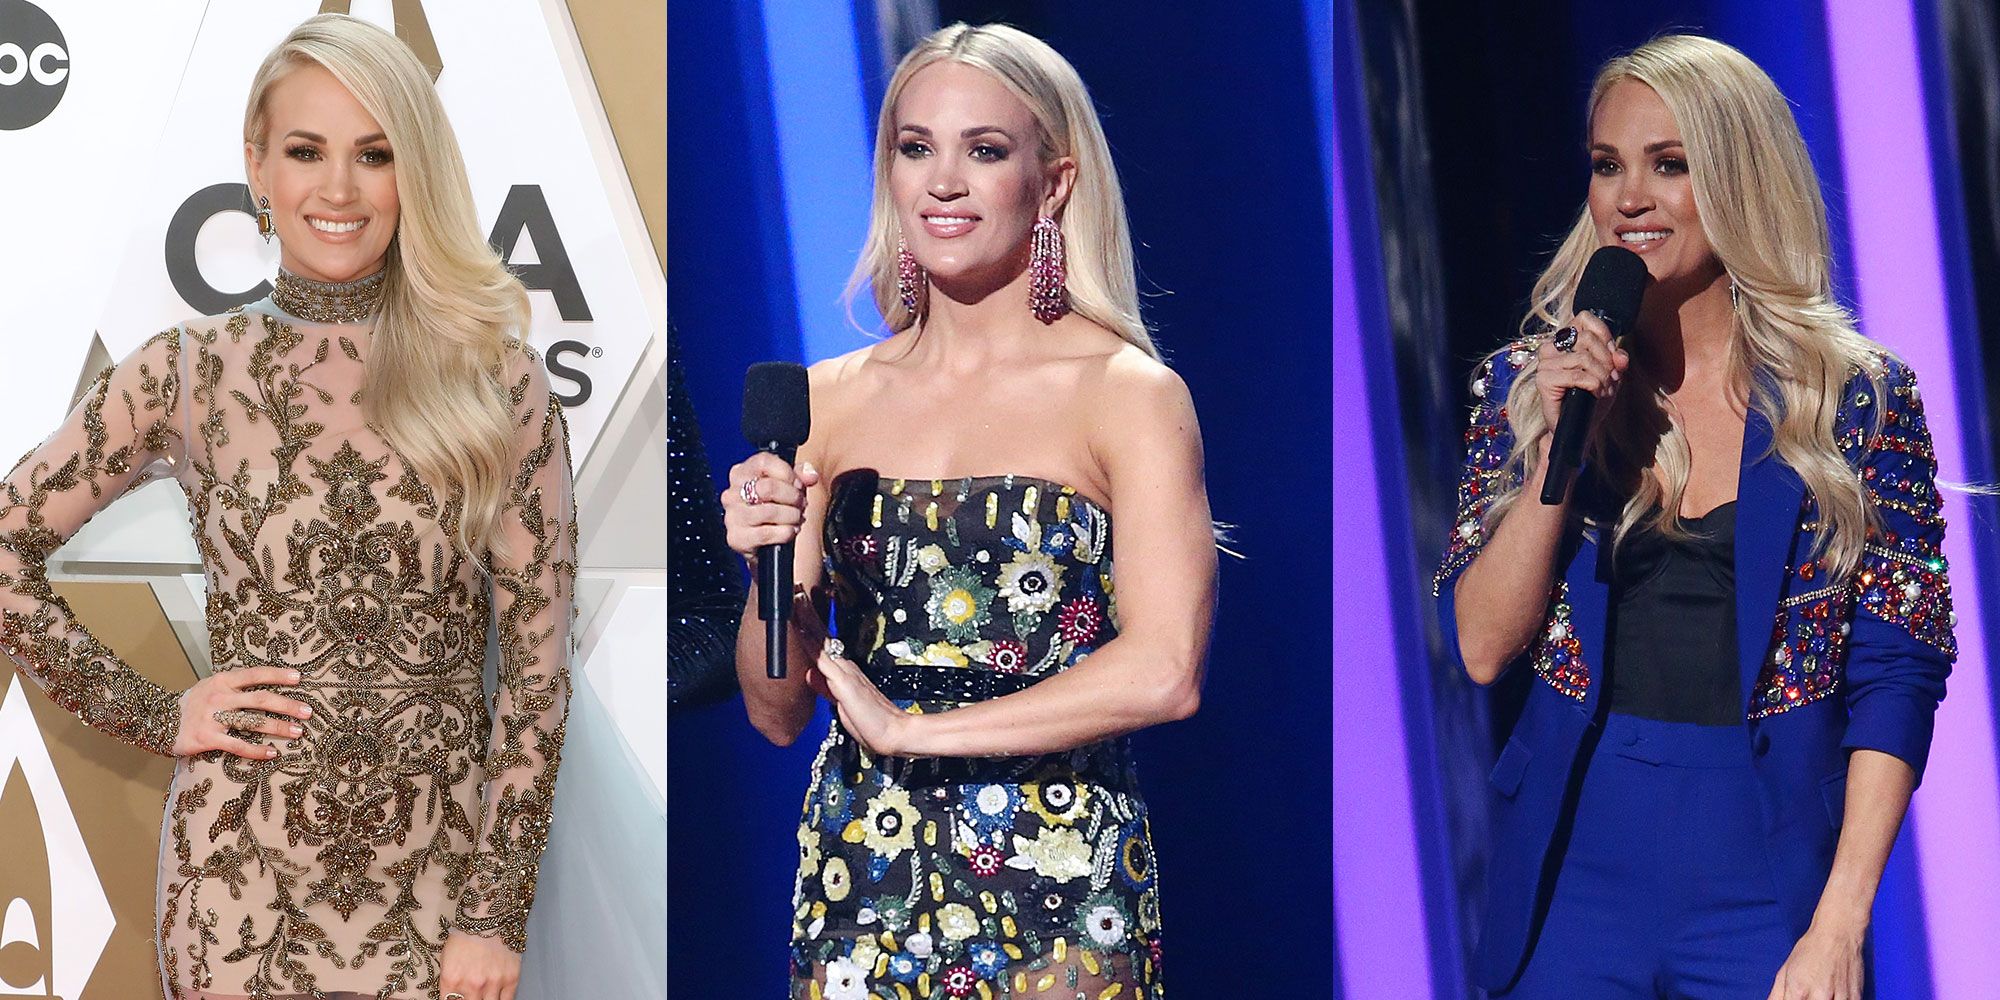 Carrie Underwood Wears 9 Different Outfits at the CMA Awards in 2019